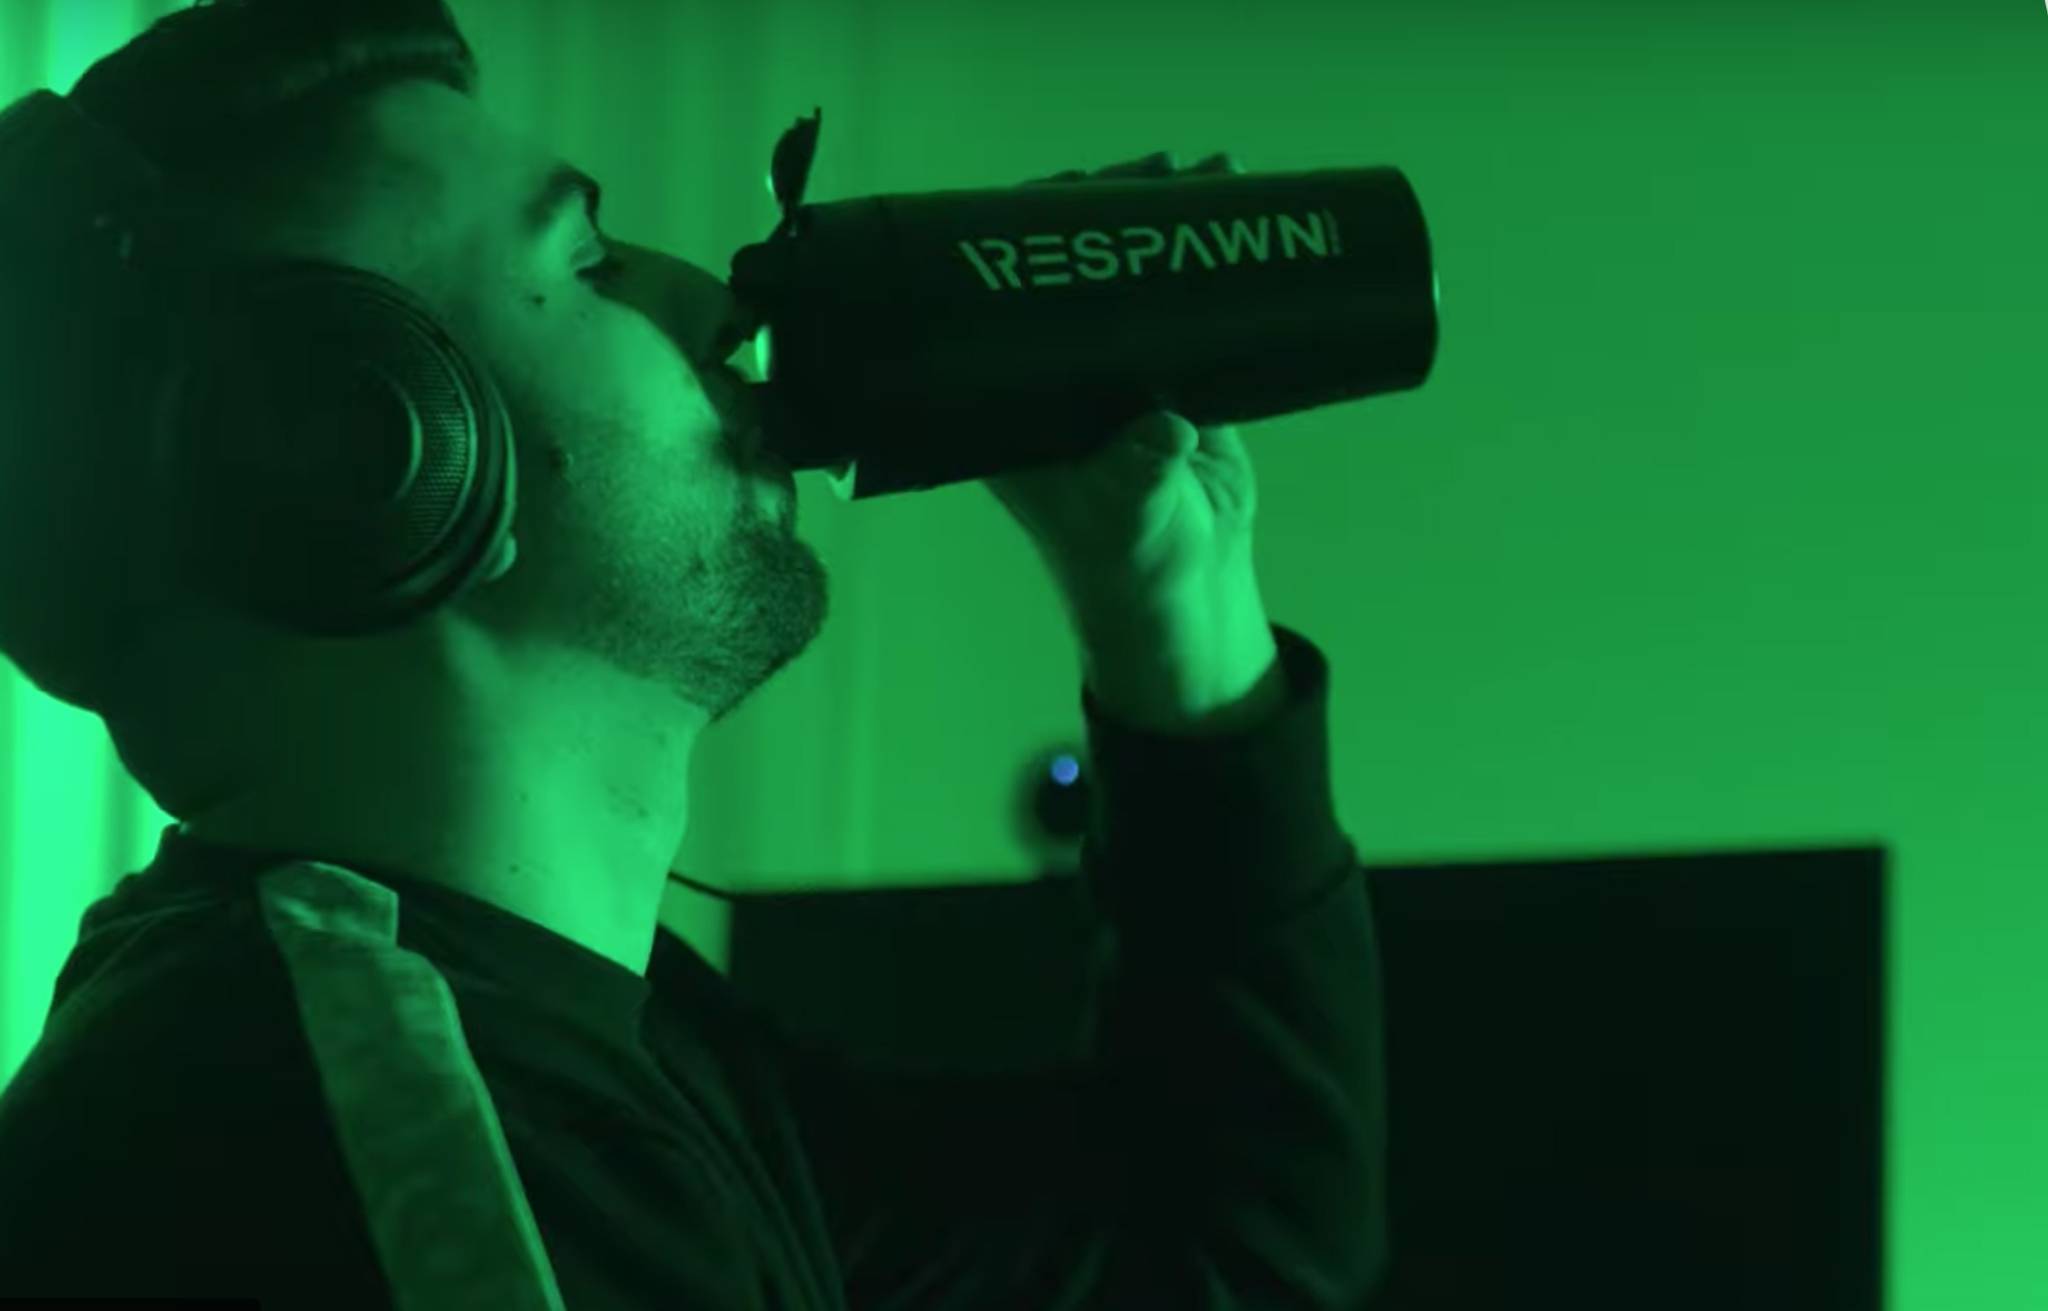 Razer’s Respawn drink gives gamers a productive high